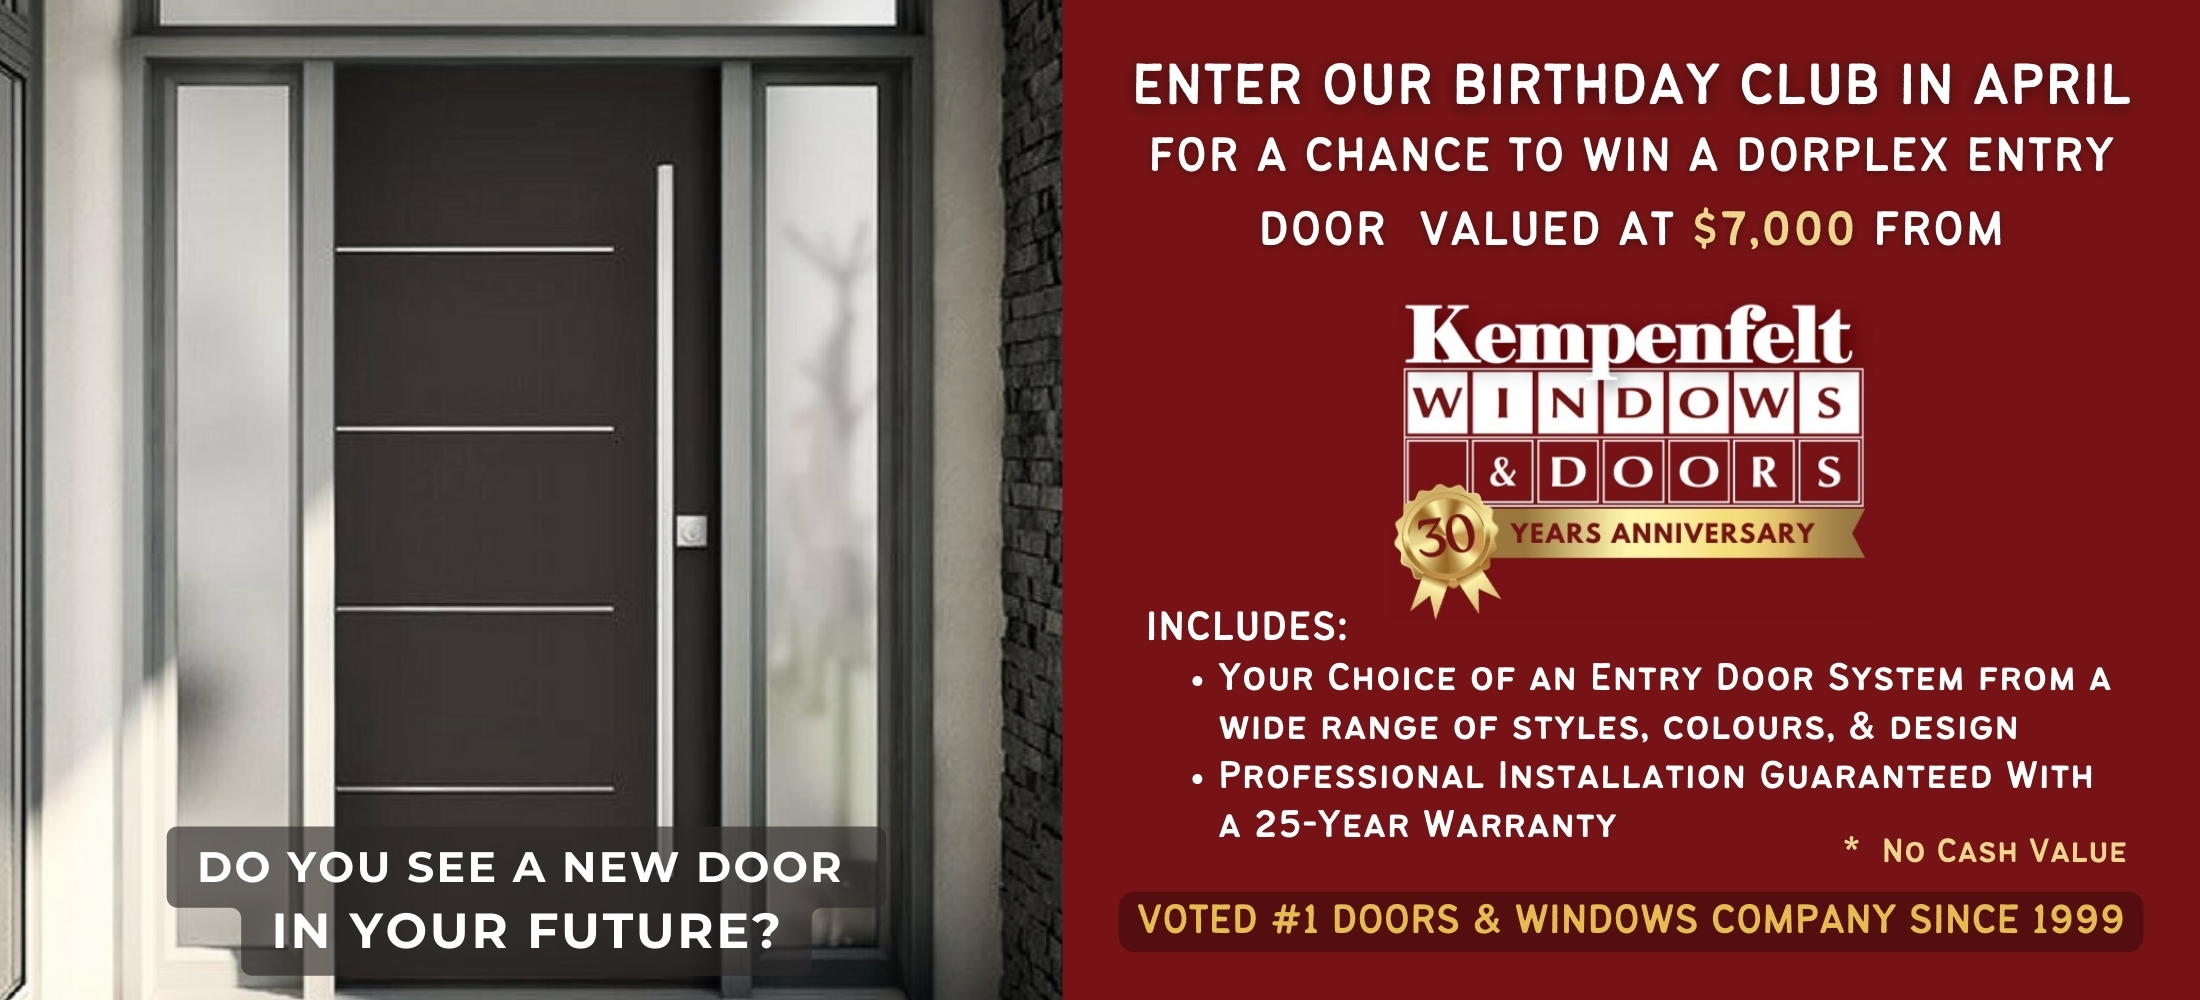 Enter our Birthday Club in April for a chance to win a Dorplex Entry Door valued at $7000.